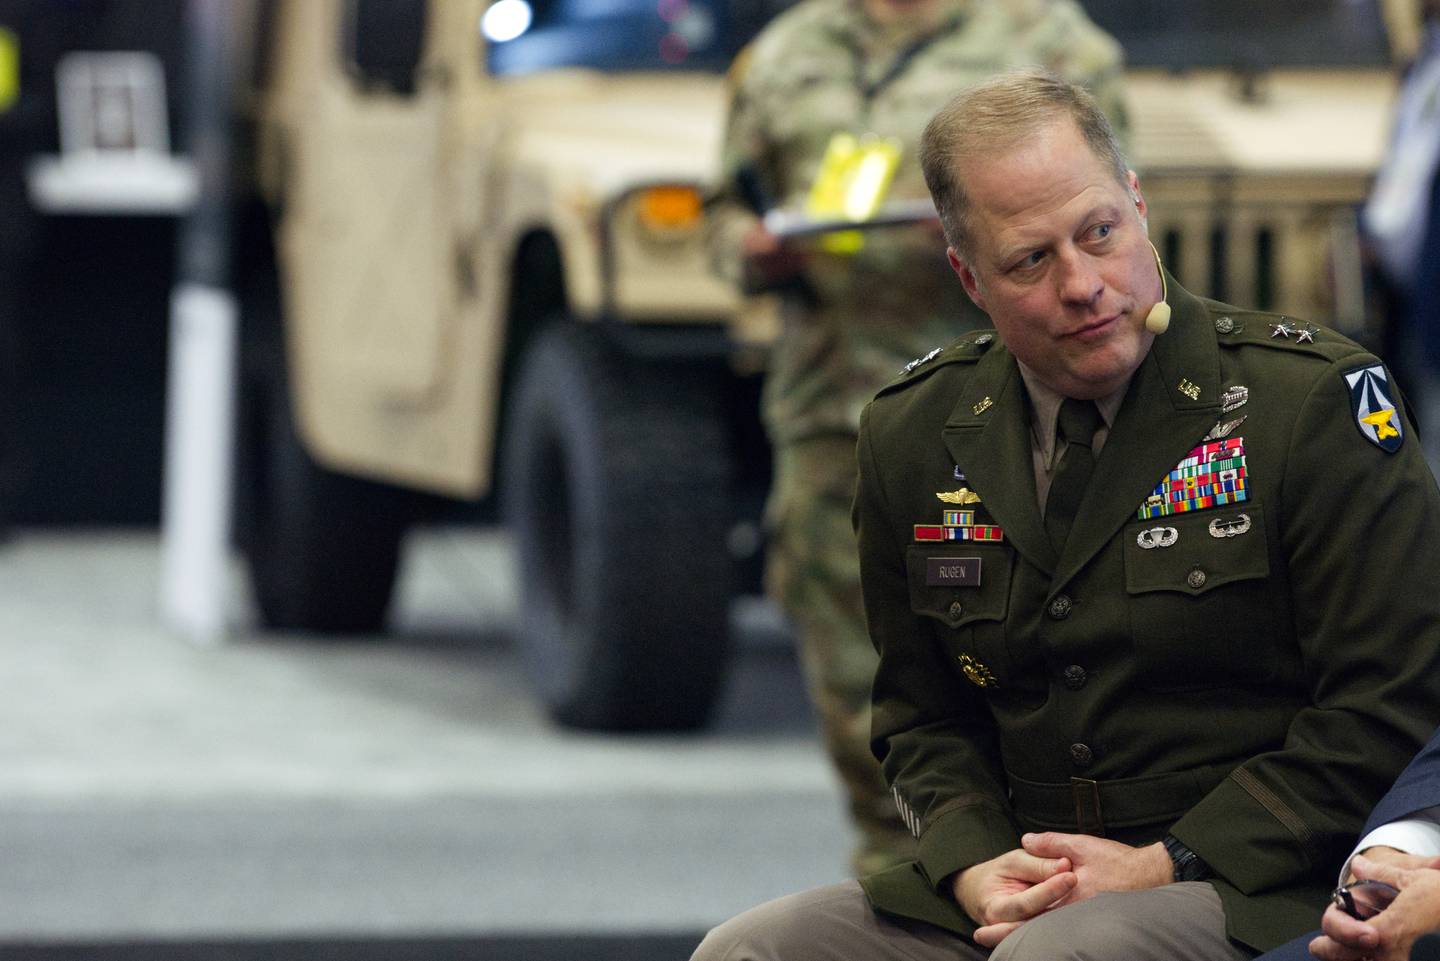 Maj. Gen. Walter Rugen, the director of the Future Vertical Lift Cross-Functional Team, listens to a speech Oct. 12, 2022, at the Association of the U.S. Army annual conference in Washington, D.C.